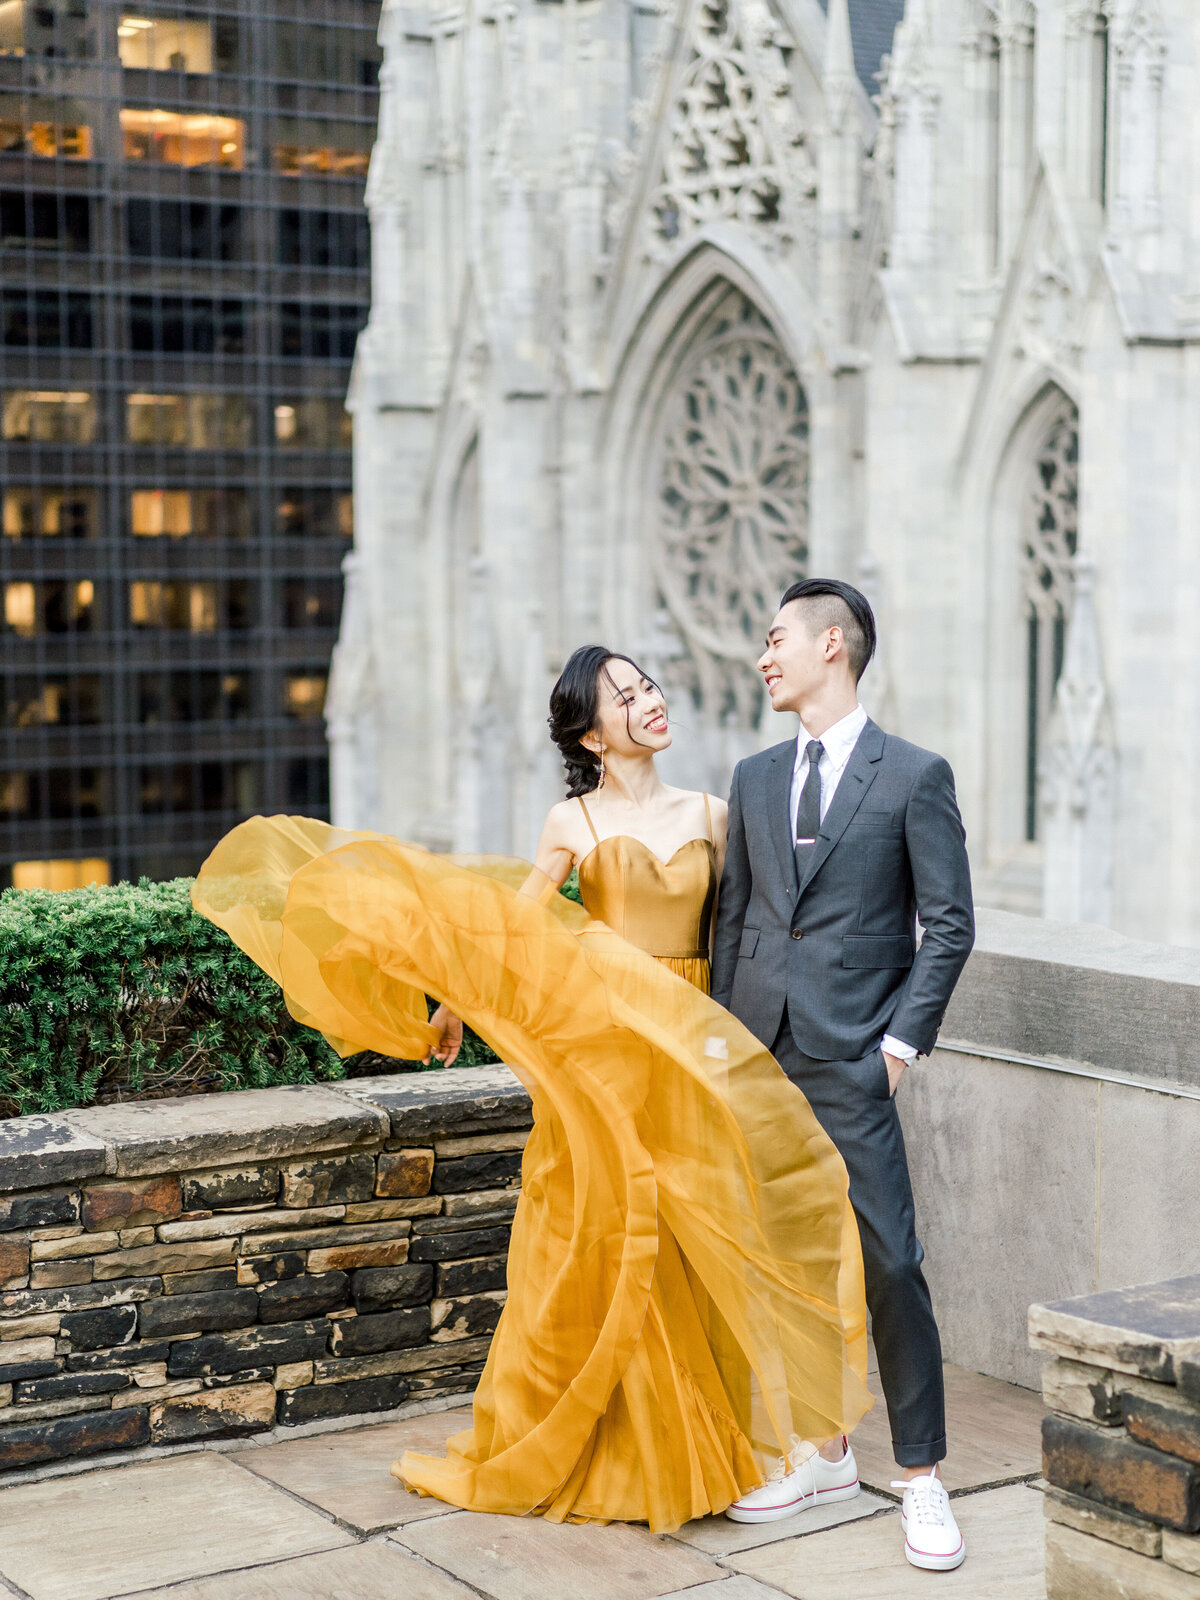 Bride in Leanne Marshall mustard yellow dress on rooftop in NYC